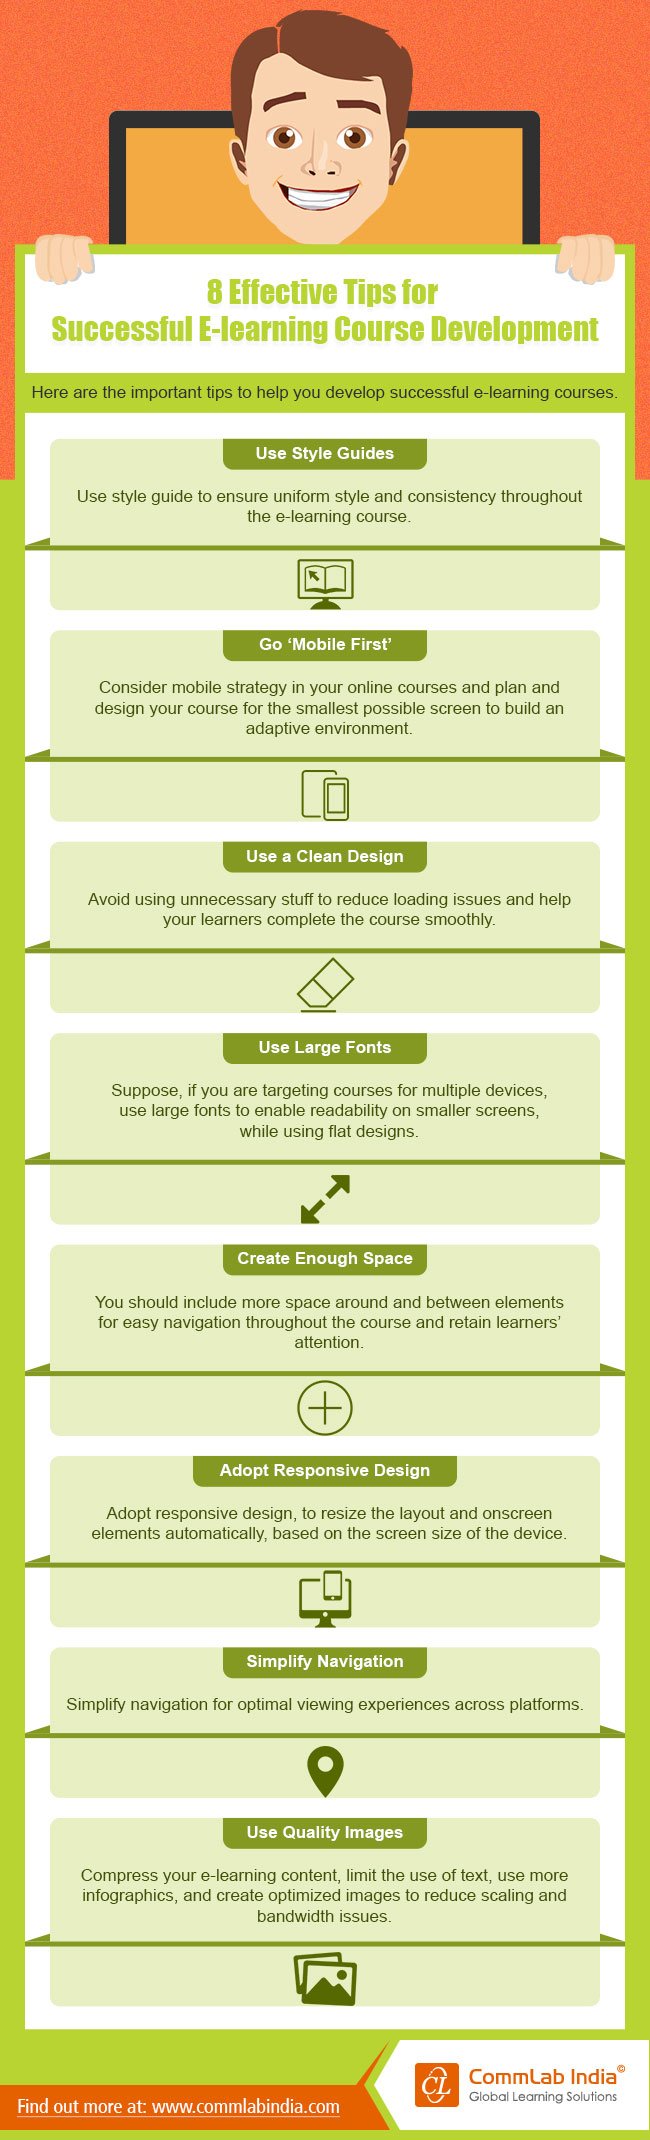 8 Effective Tips for Successful E-learning Course Development [Infographic]